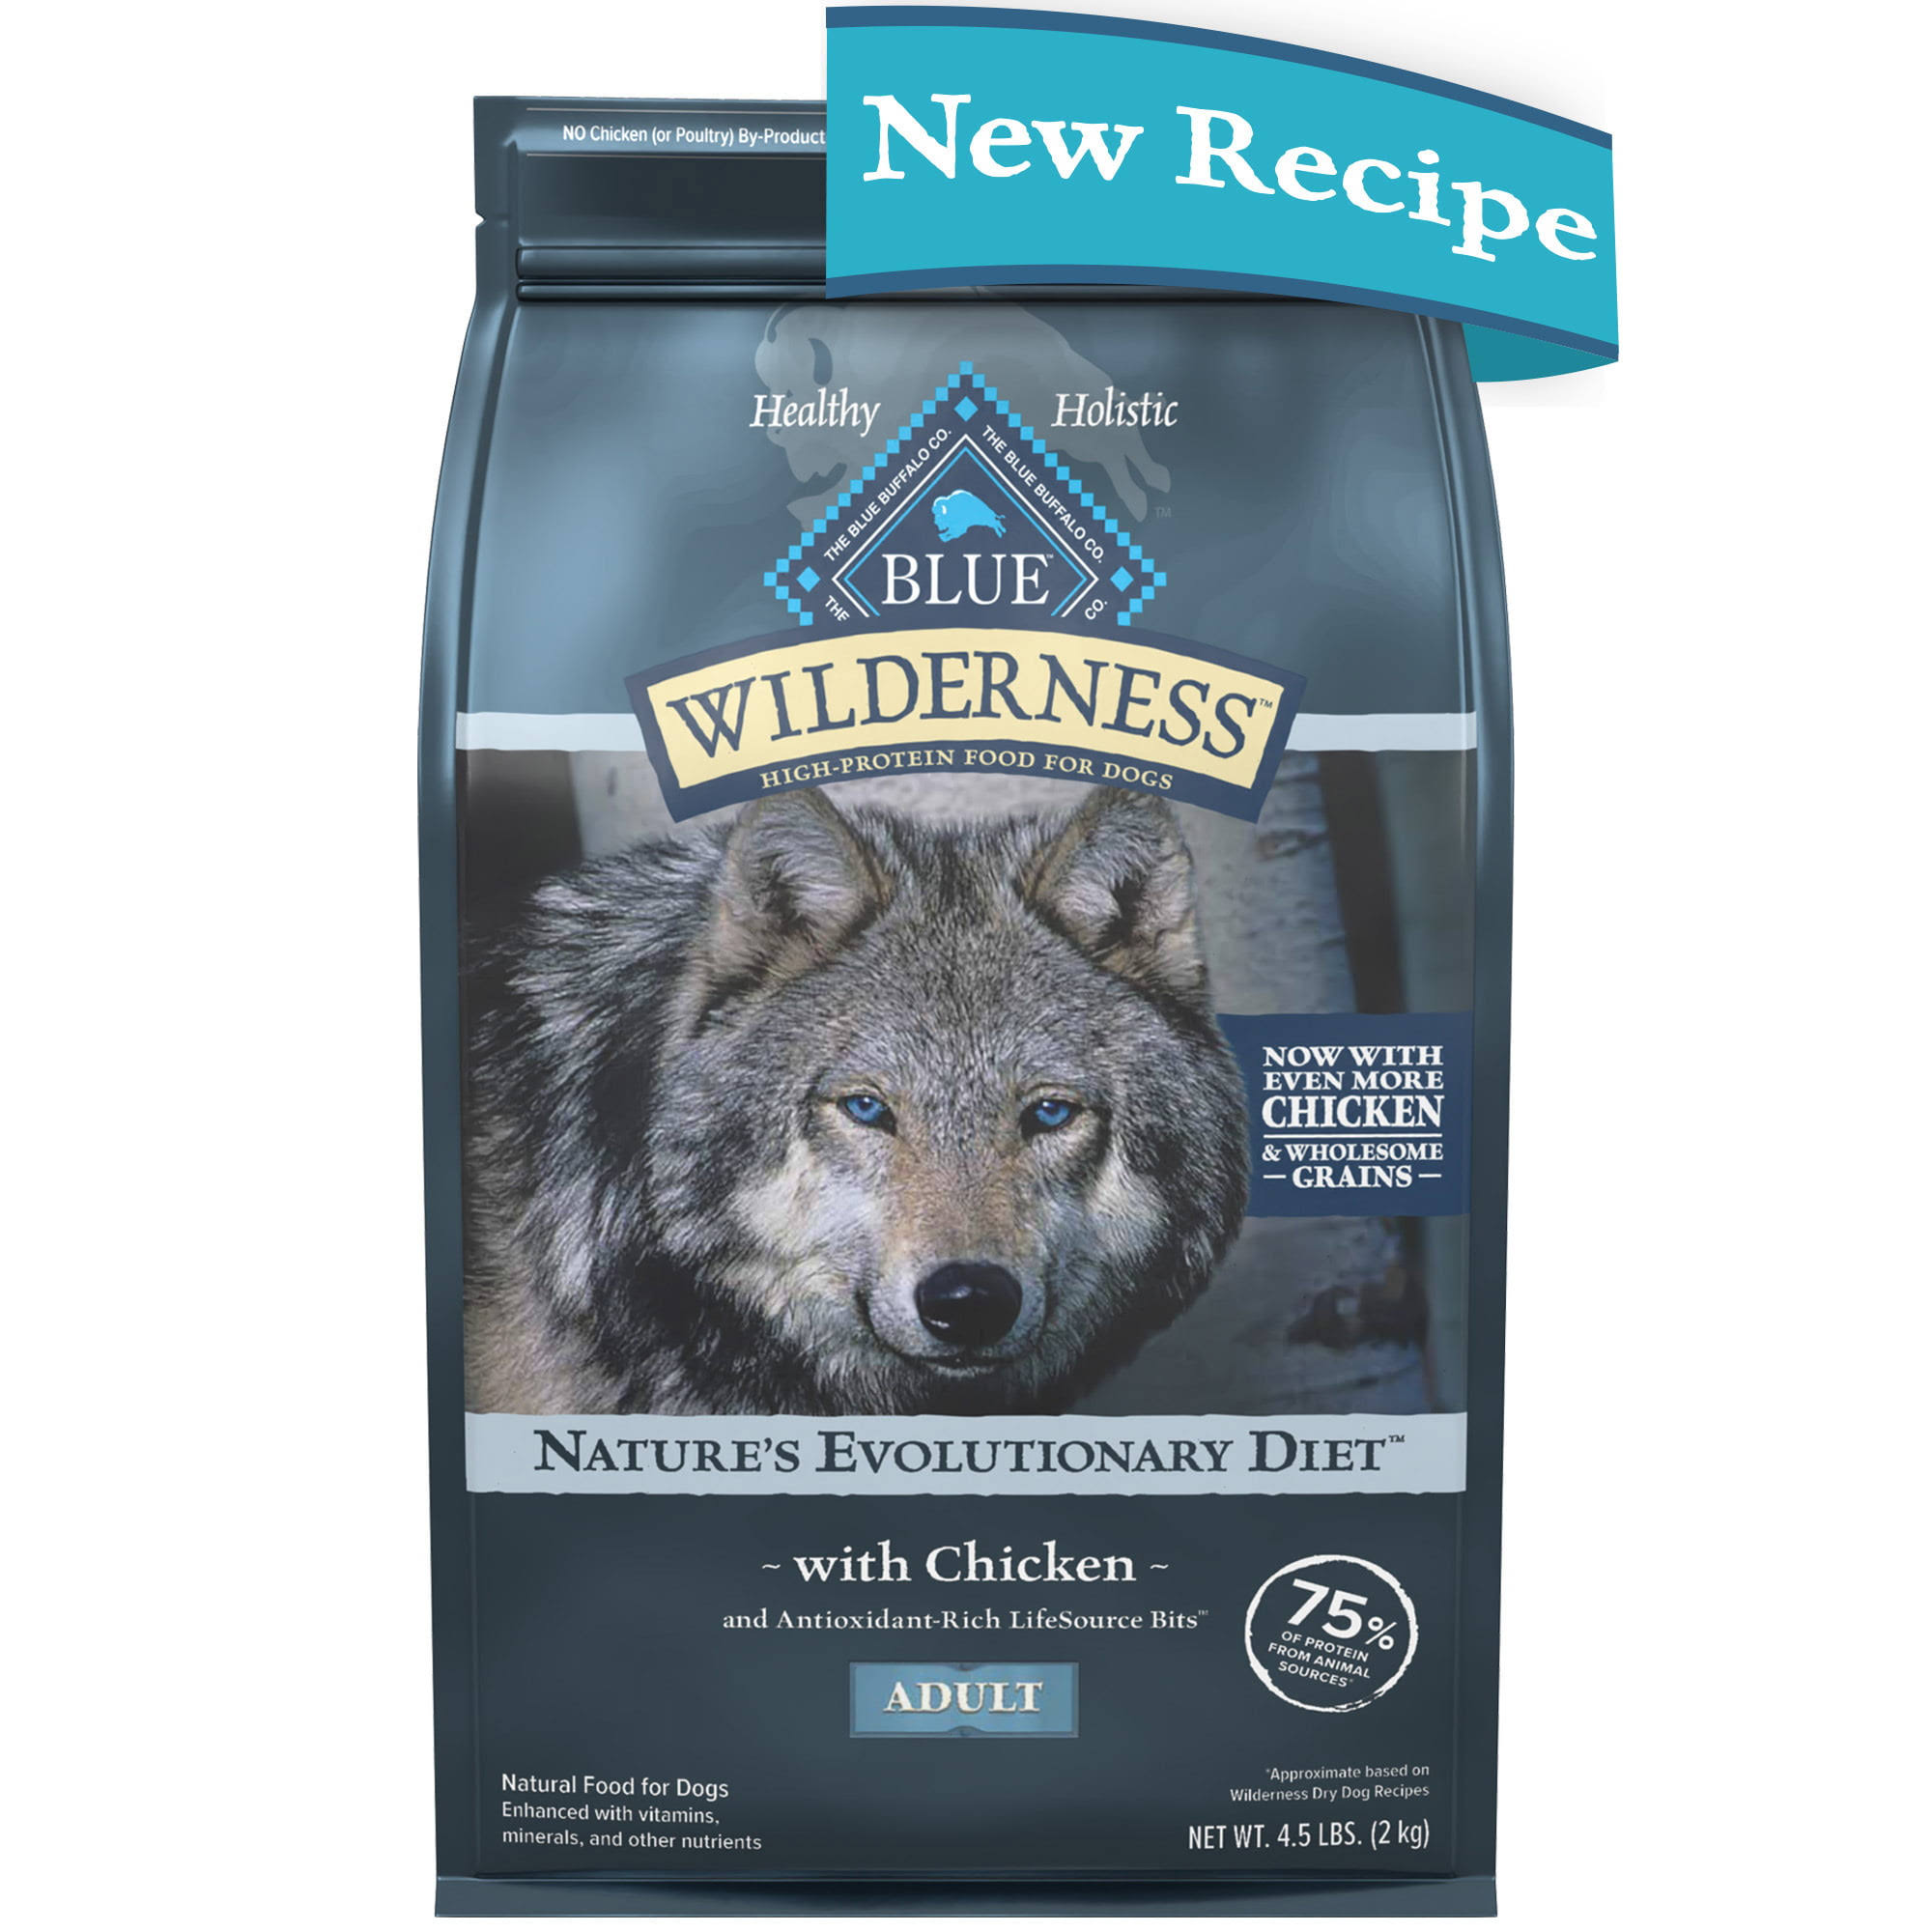 Blue Buffalo Wilderness Nature's Evolutionary Diet With Chicken & Wholesome Grains Adult Recipe Dry Dog Food